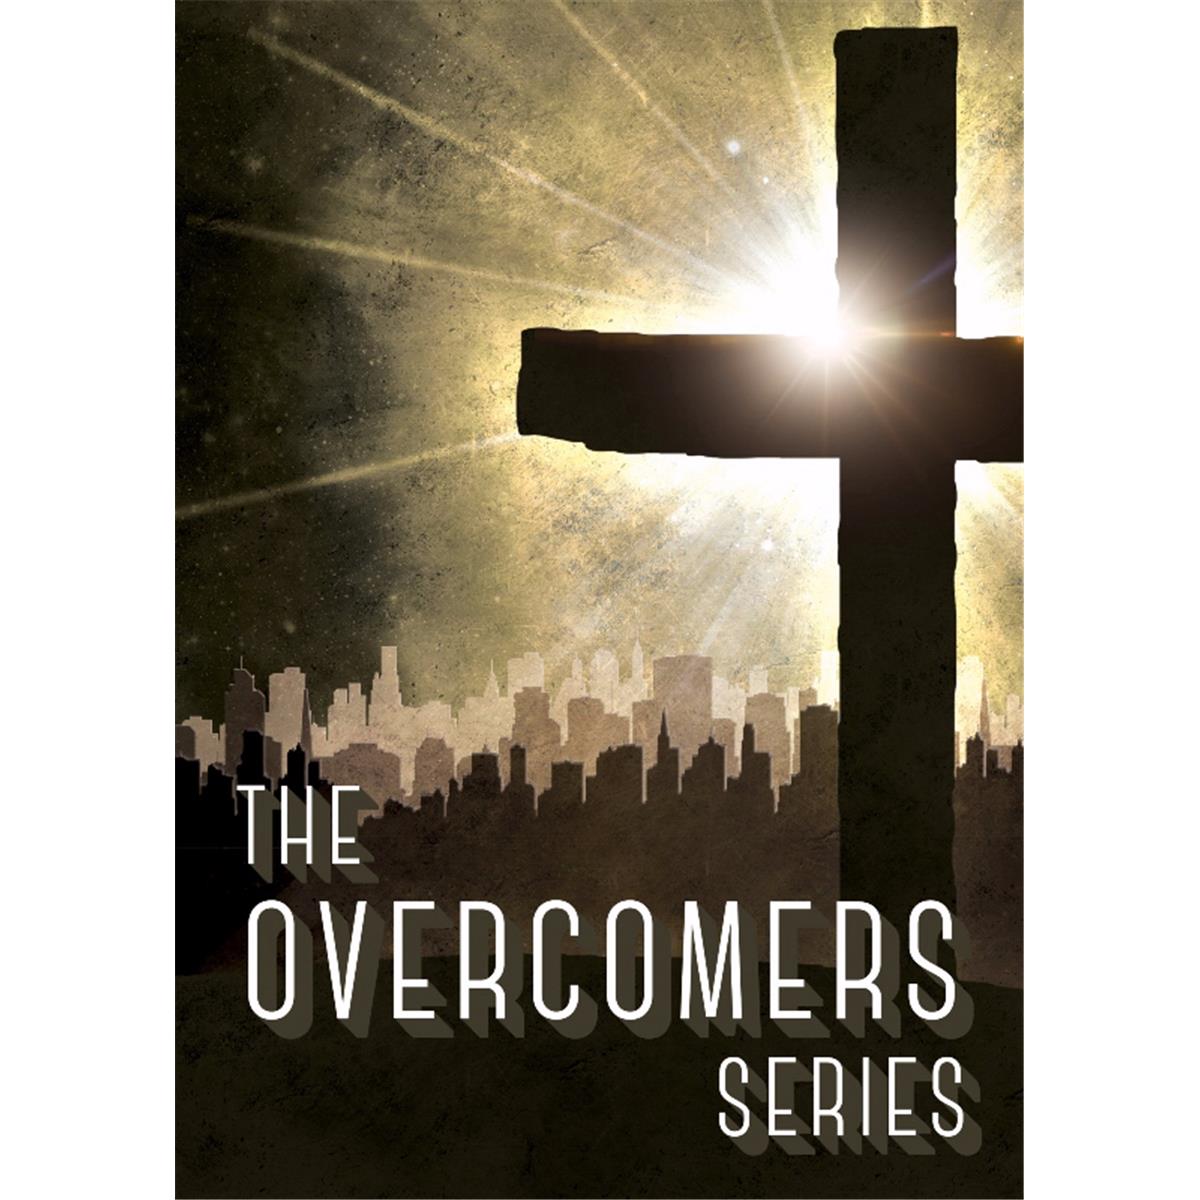 Pure Life Ministries 156312 Dvd - The Overcomers Series - 12 Dvd Set